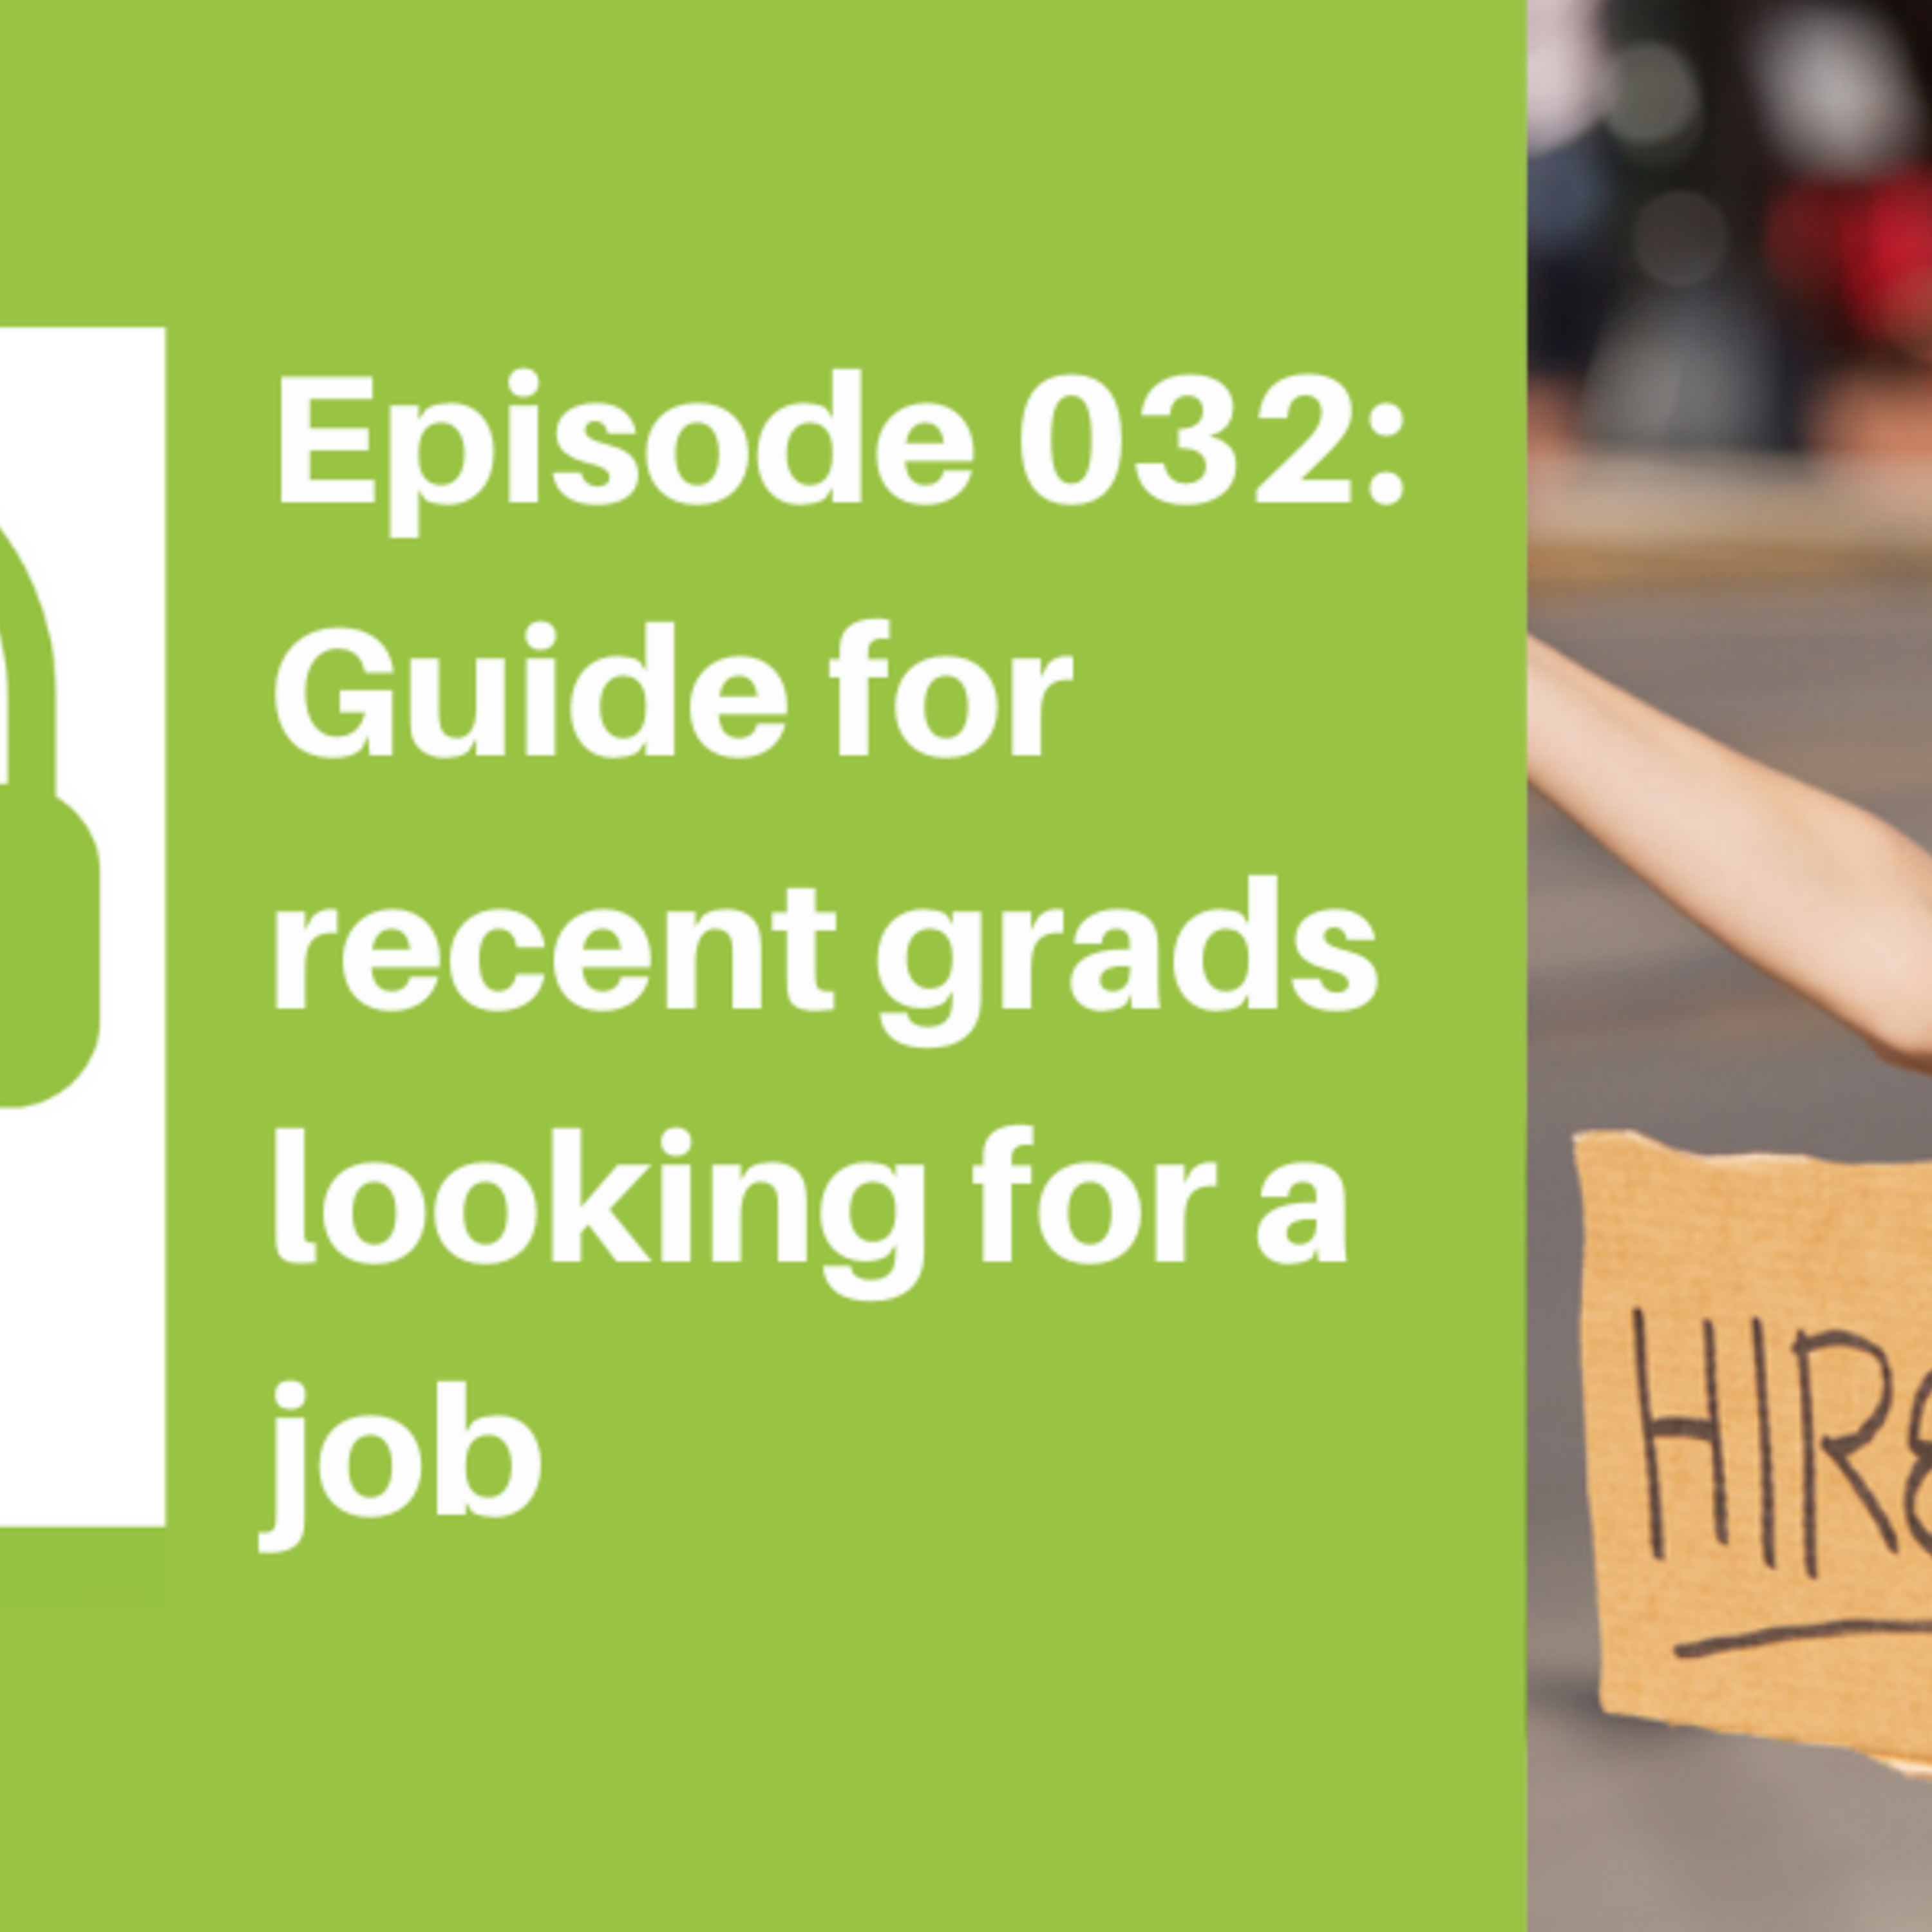 Episode 032: Advice For New Graduates Looking For a Job